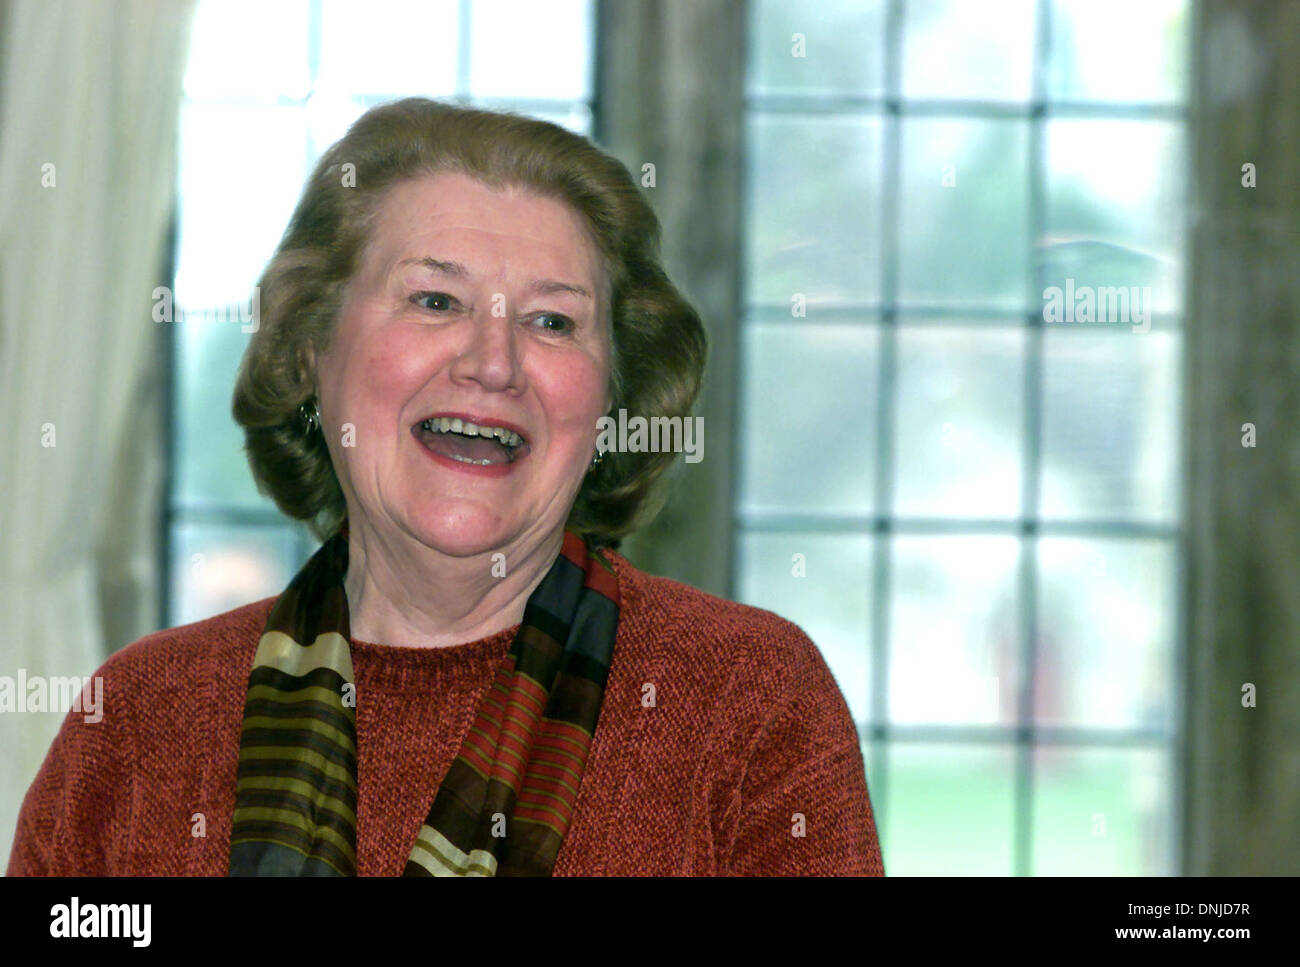 Actress Patricia Routledge famous for playing the part of Hyacinth Bucket in the sitcom Keeping Up Appearances at the opening of an art exhibition in Parham House UK Stock Photo